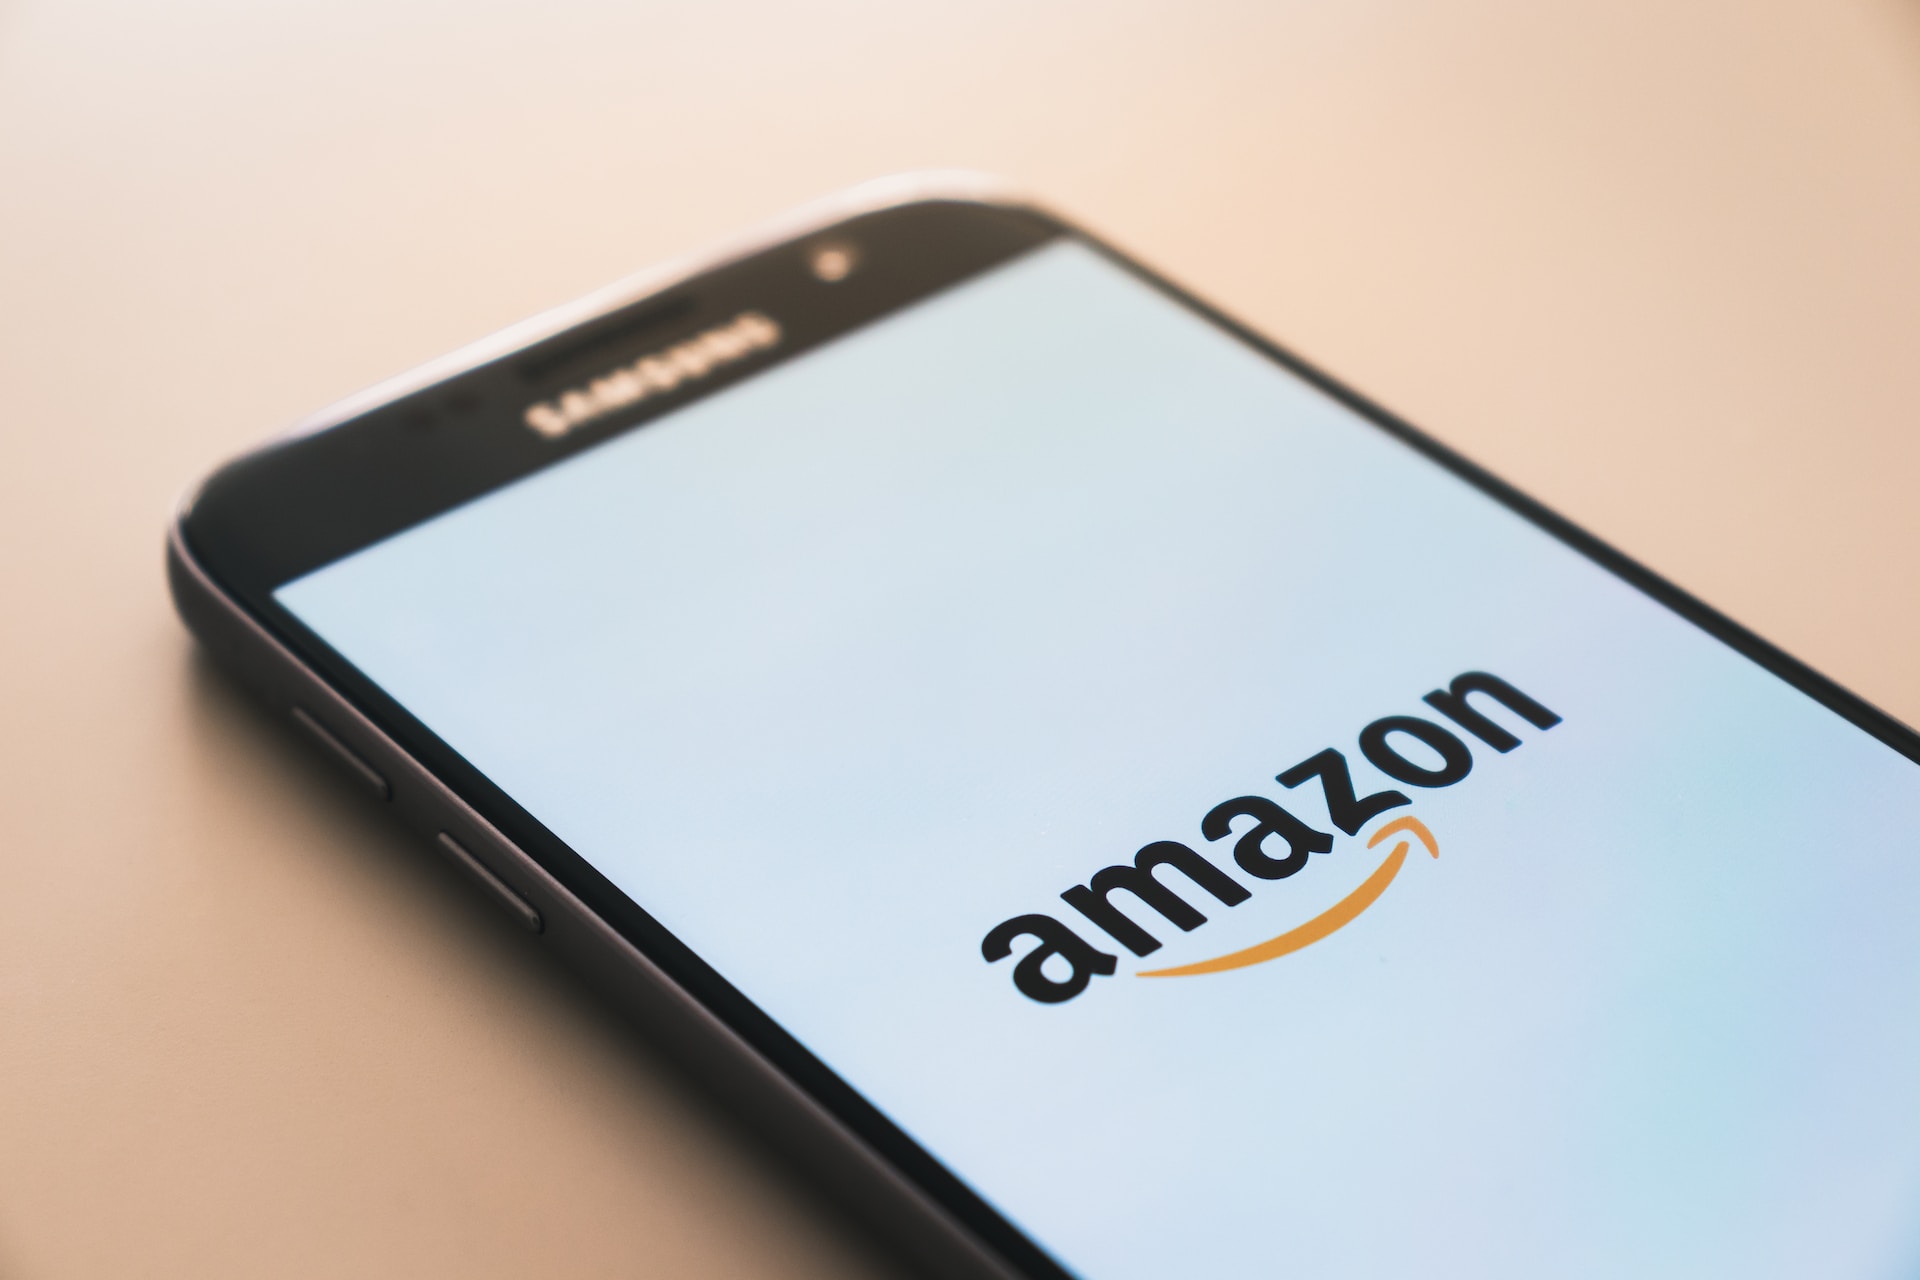 A mobile phone showing the Amazon marketplace logo.